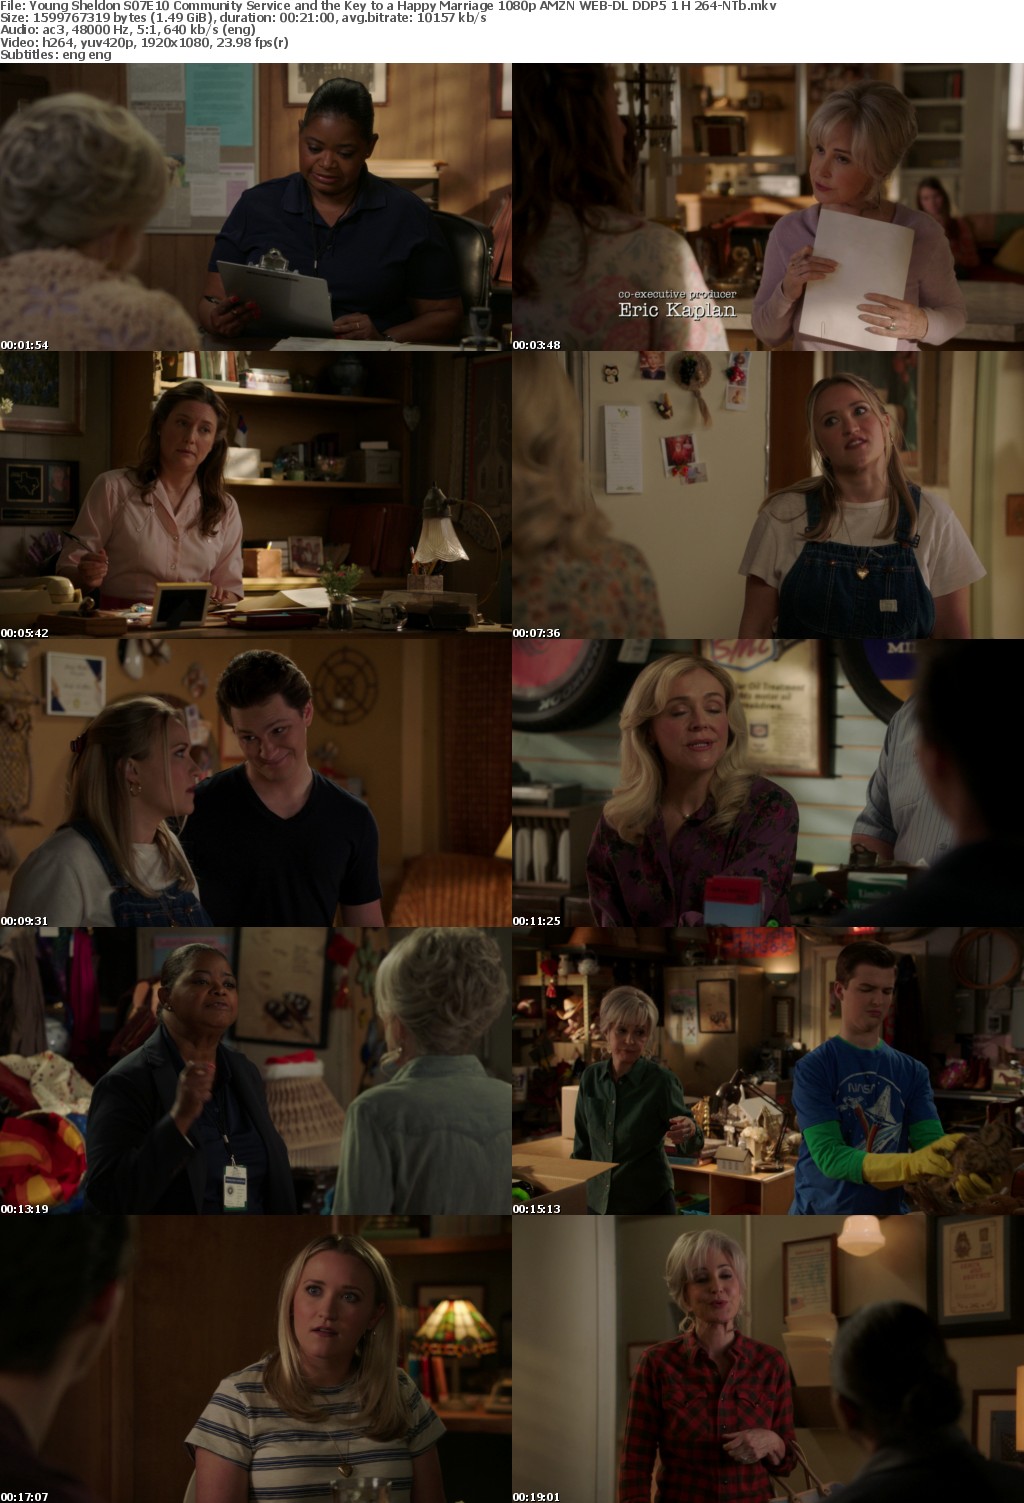 Young Sheldon S07E10 Community Service and the Key to a Happy Marriage 1080p AMZN WEB-DL DDP5 1 H 264-NTb